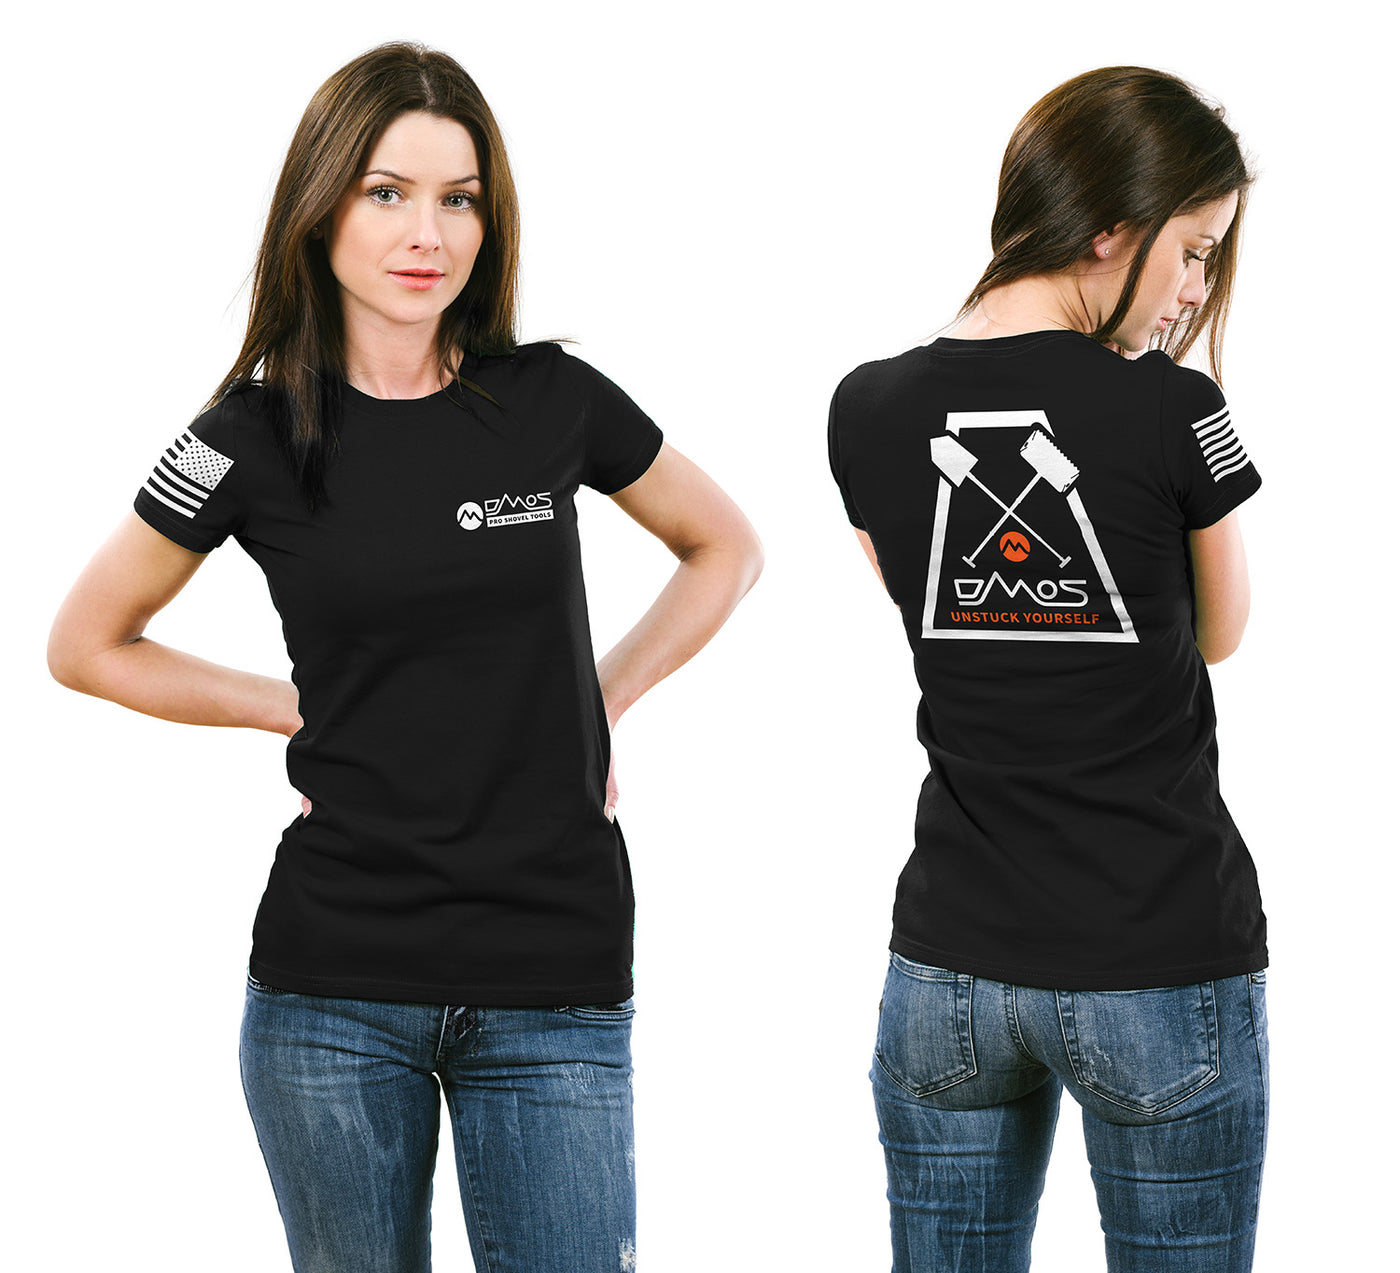 Women's T-Shirt DMOS Trapezoid Back with Flag on Sleeve